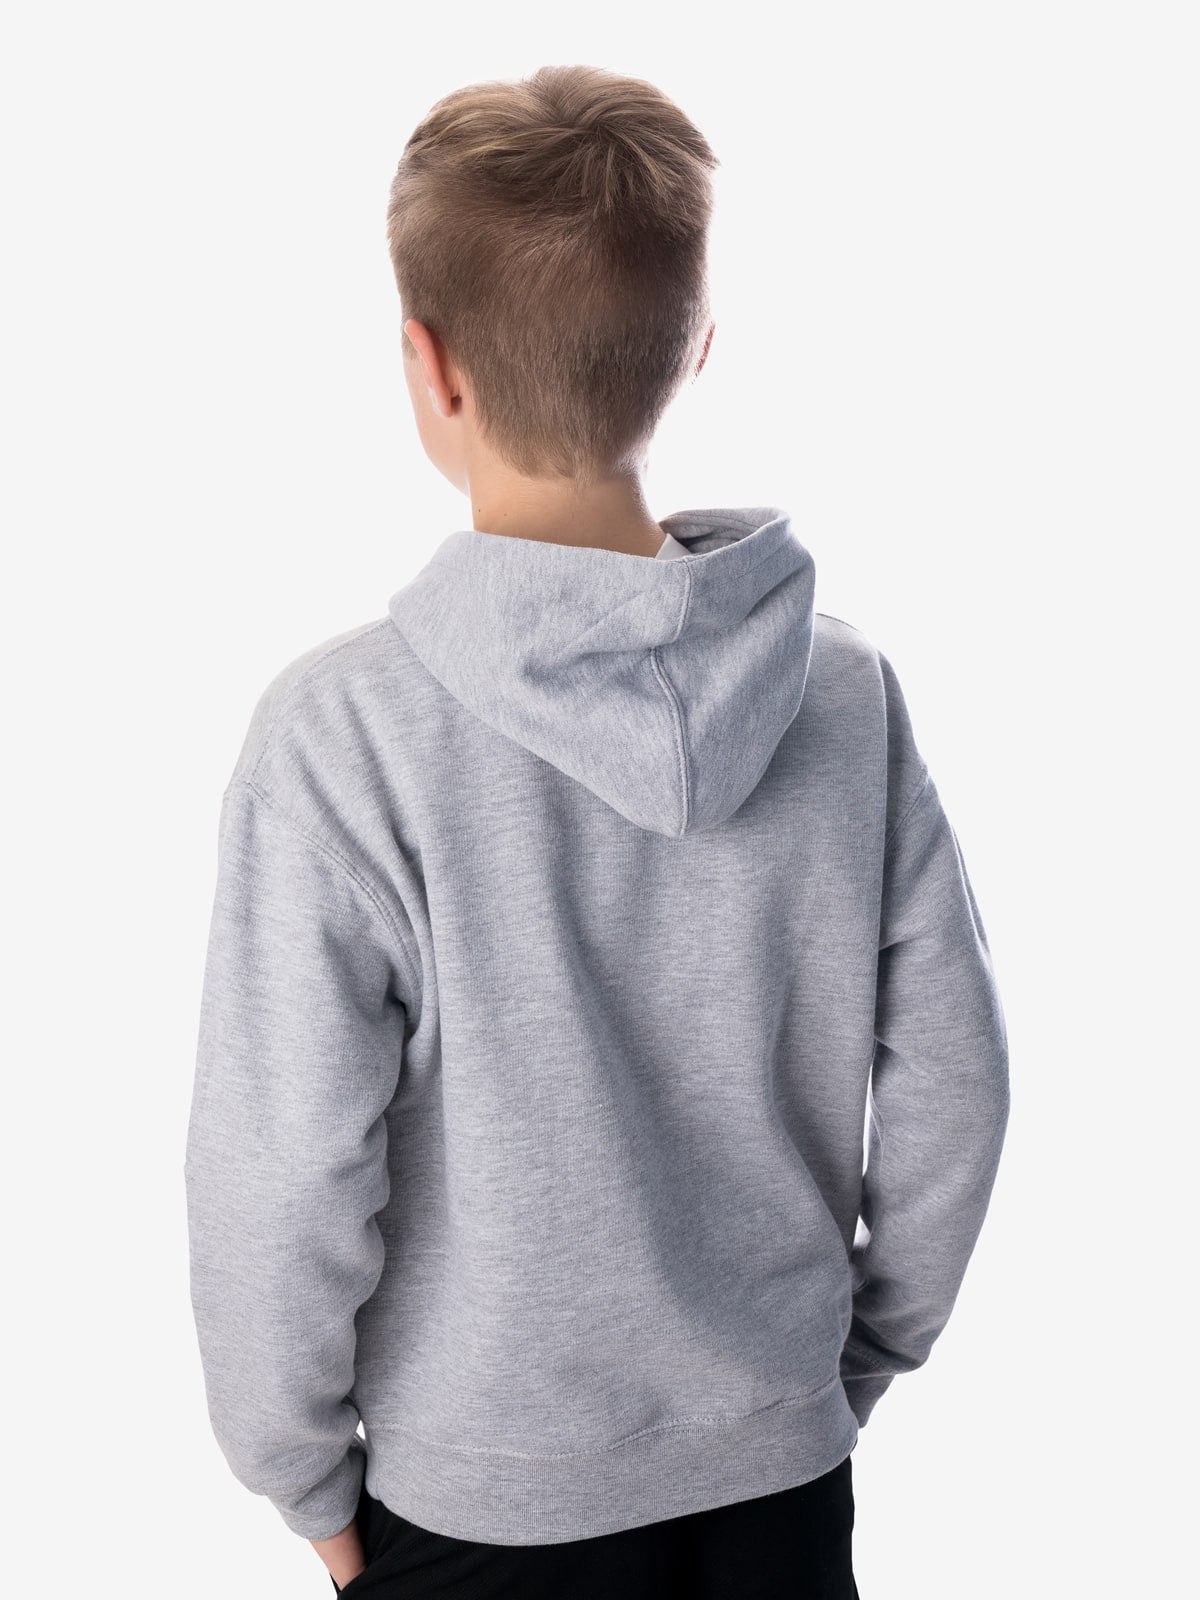 Back View - Boys' Insect Shield Hoody, Grey Heather